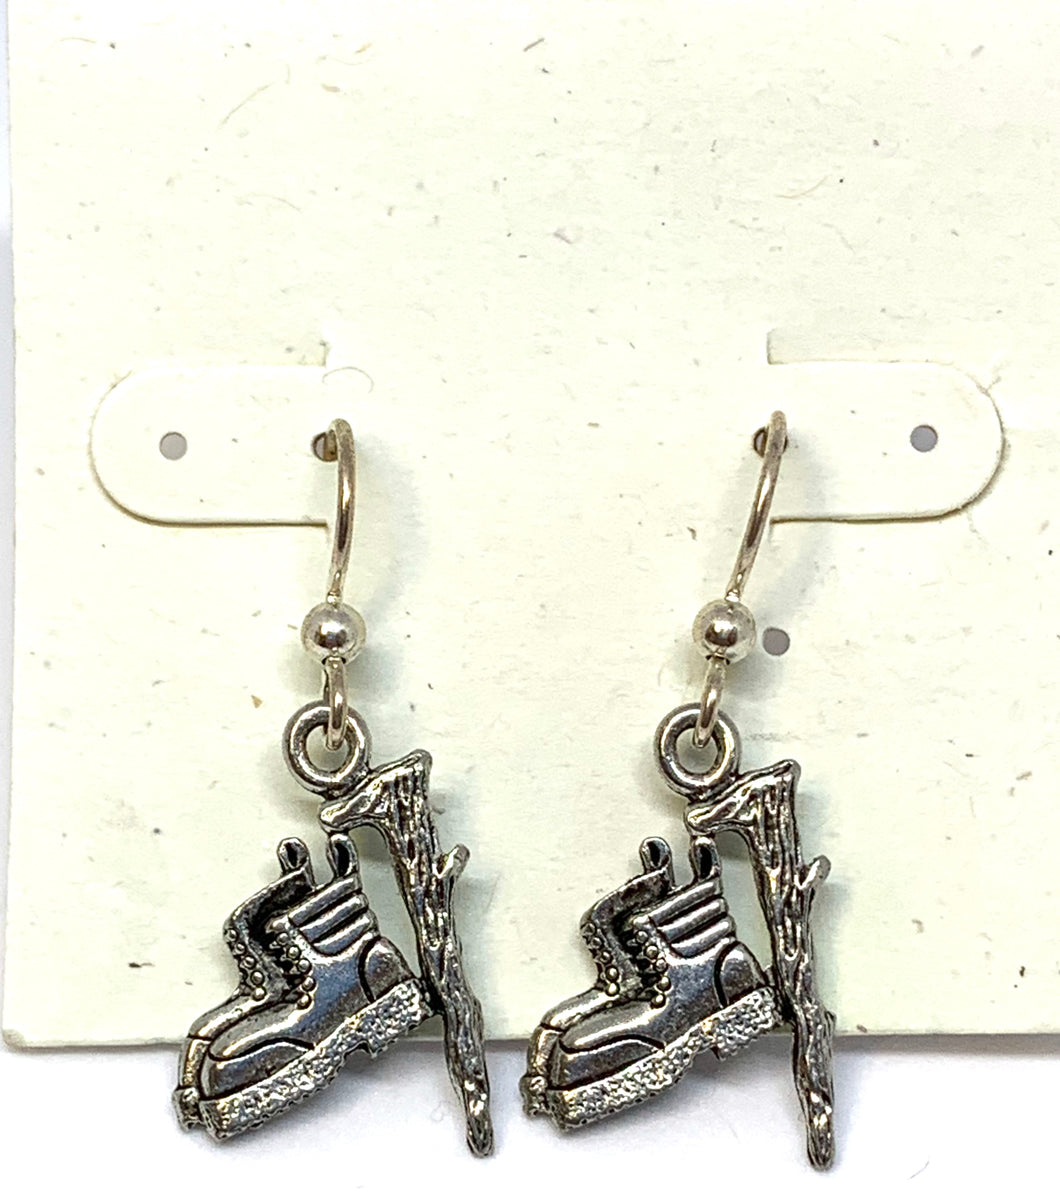 Hiking Boot with Walking Stick Earrings - Lively Accents